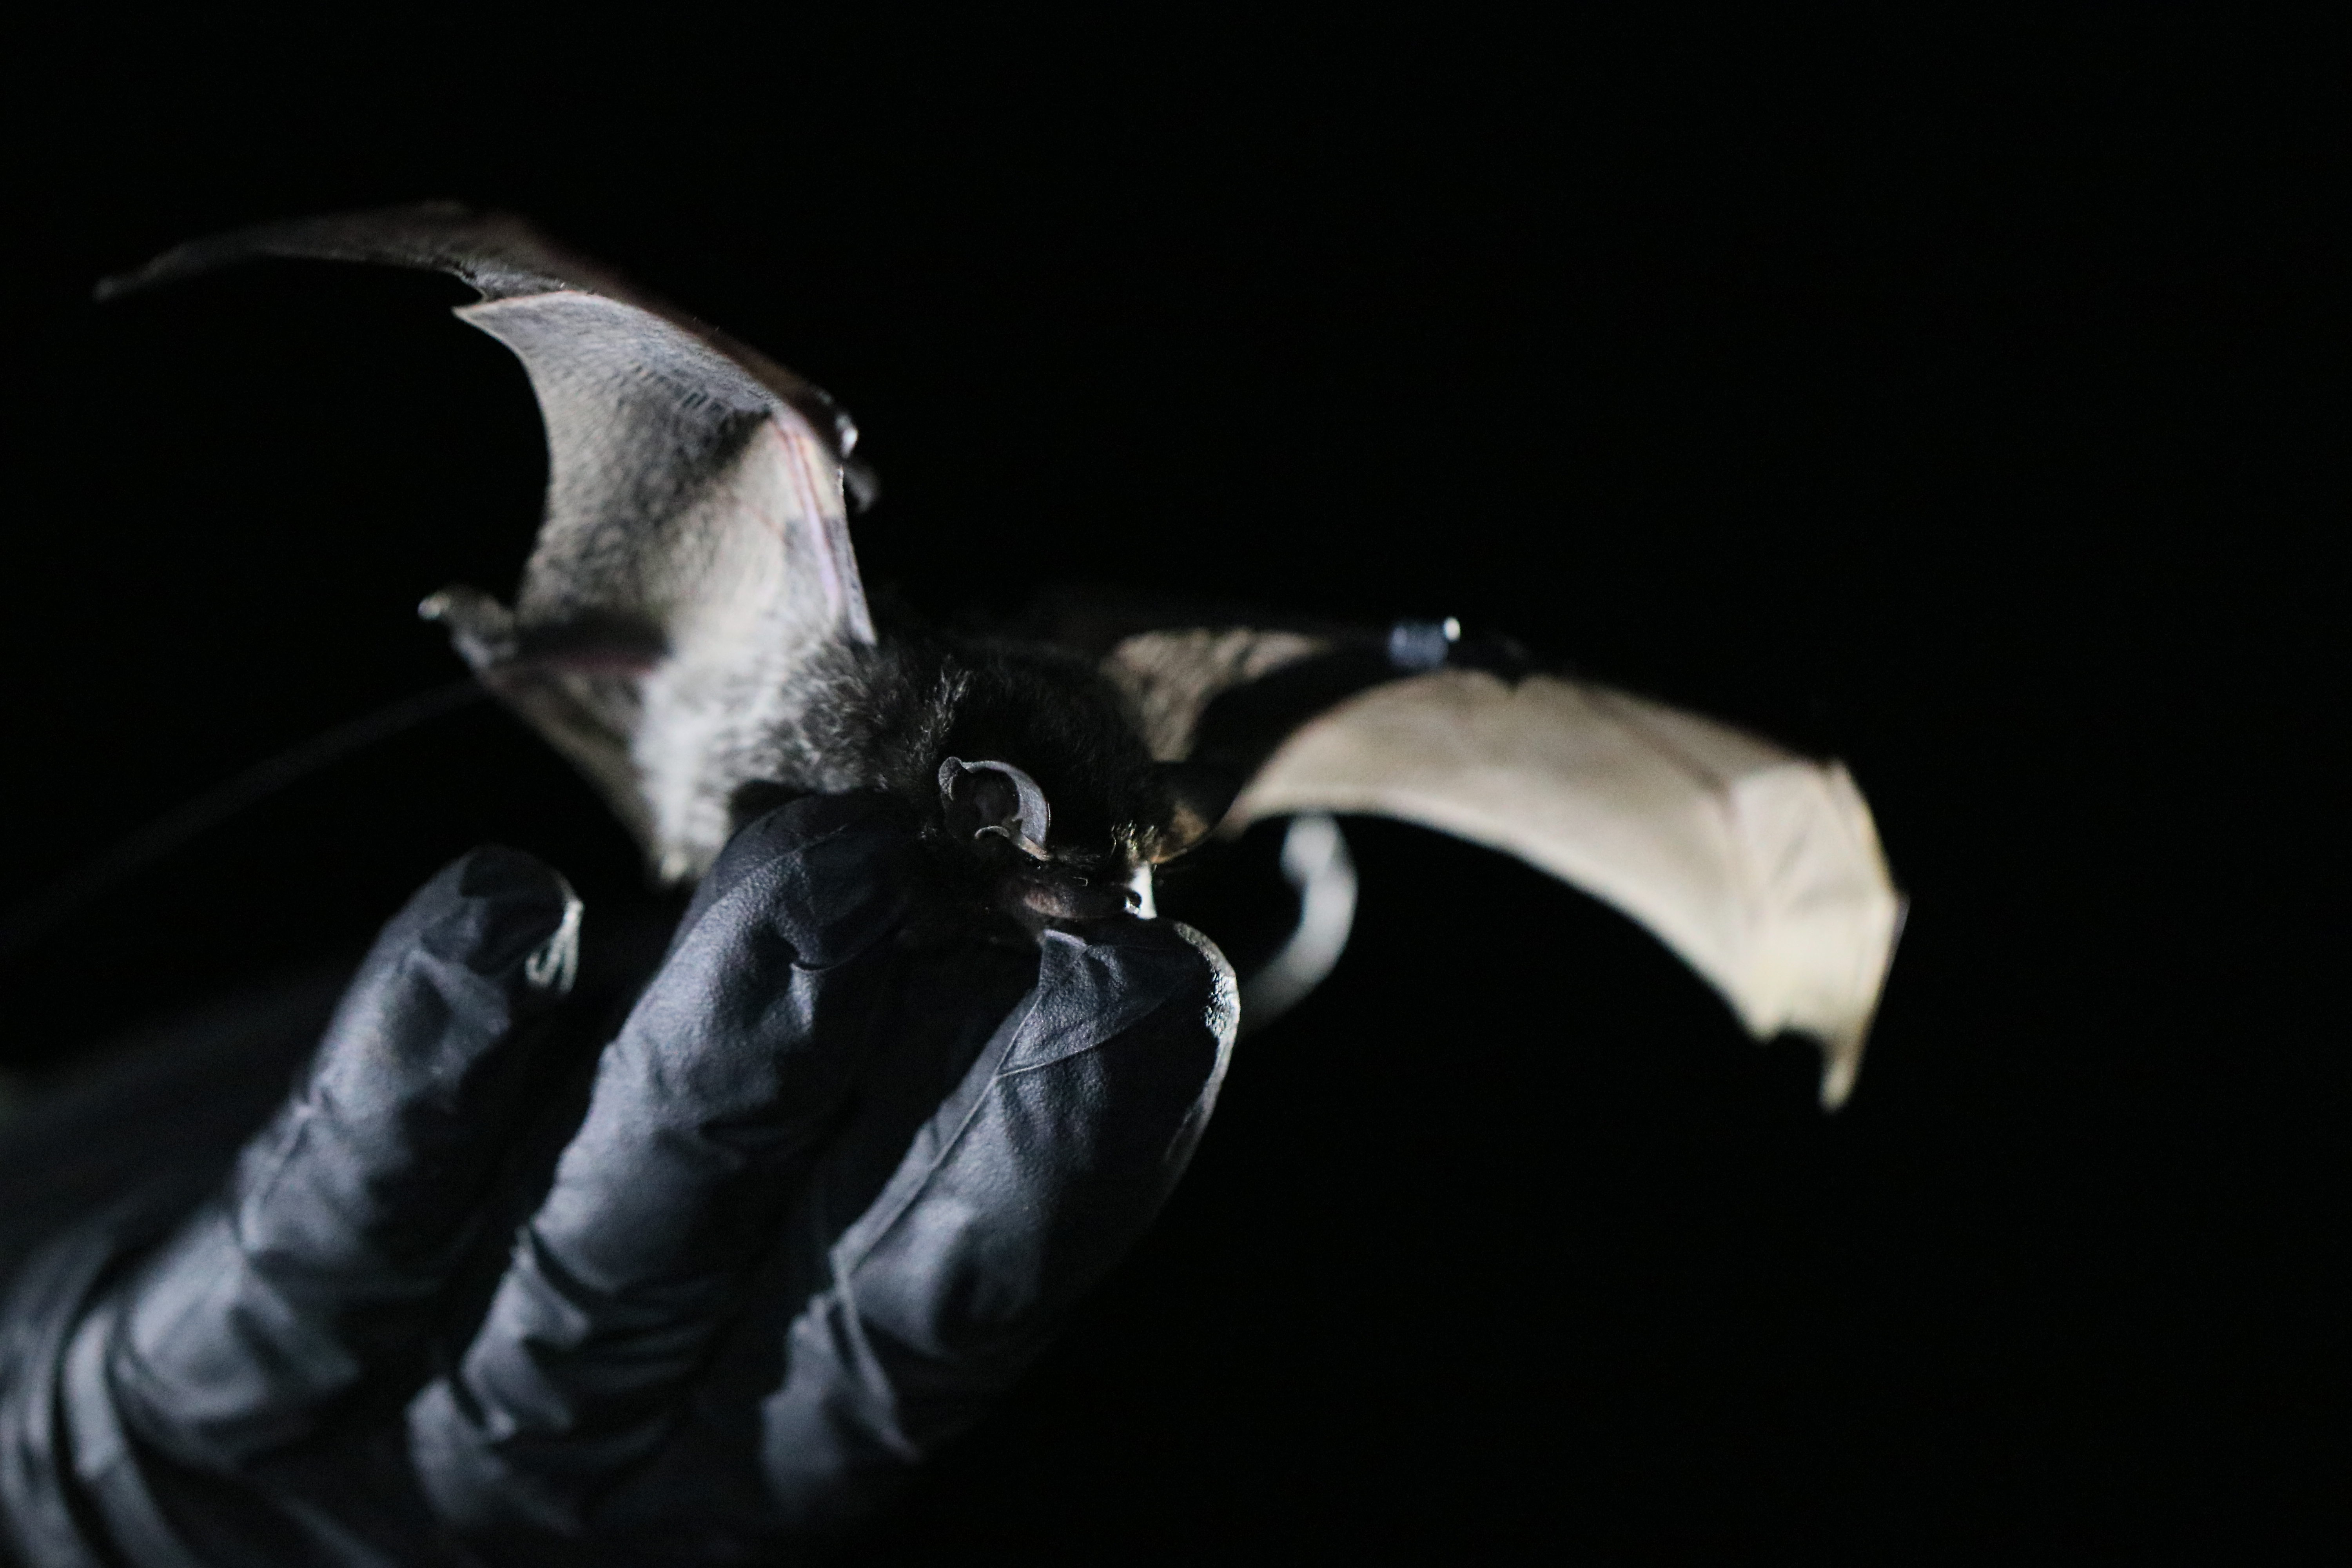 A Silver-haired Bat taking flight off someone's hand. The bat's wings are stretched open. The background of the photo is completely dark